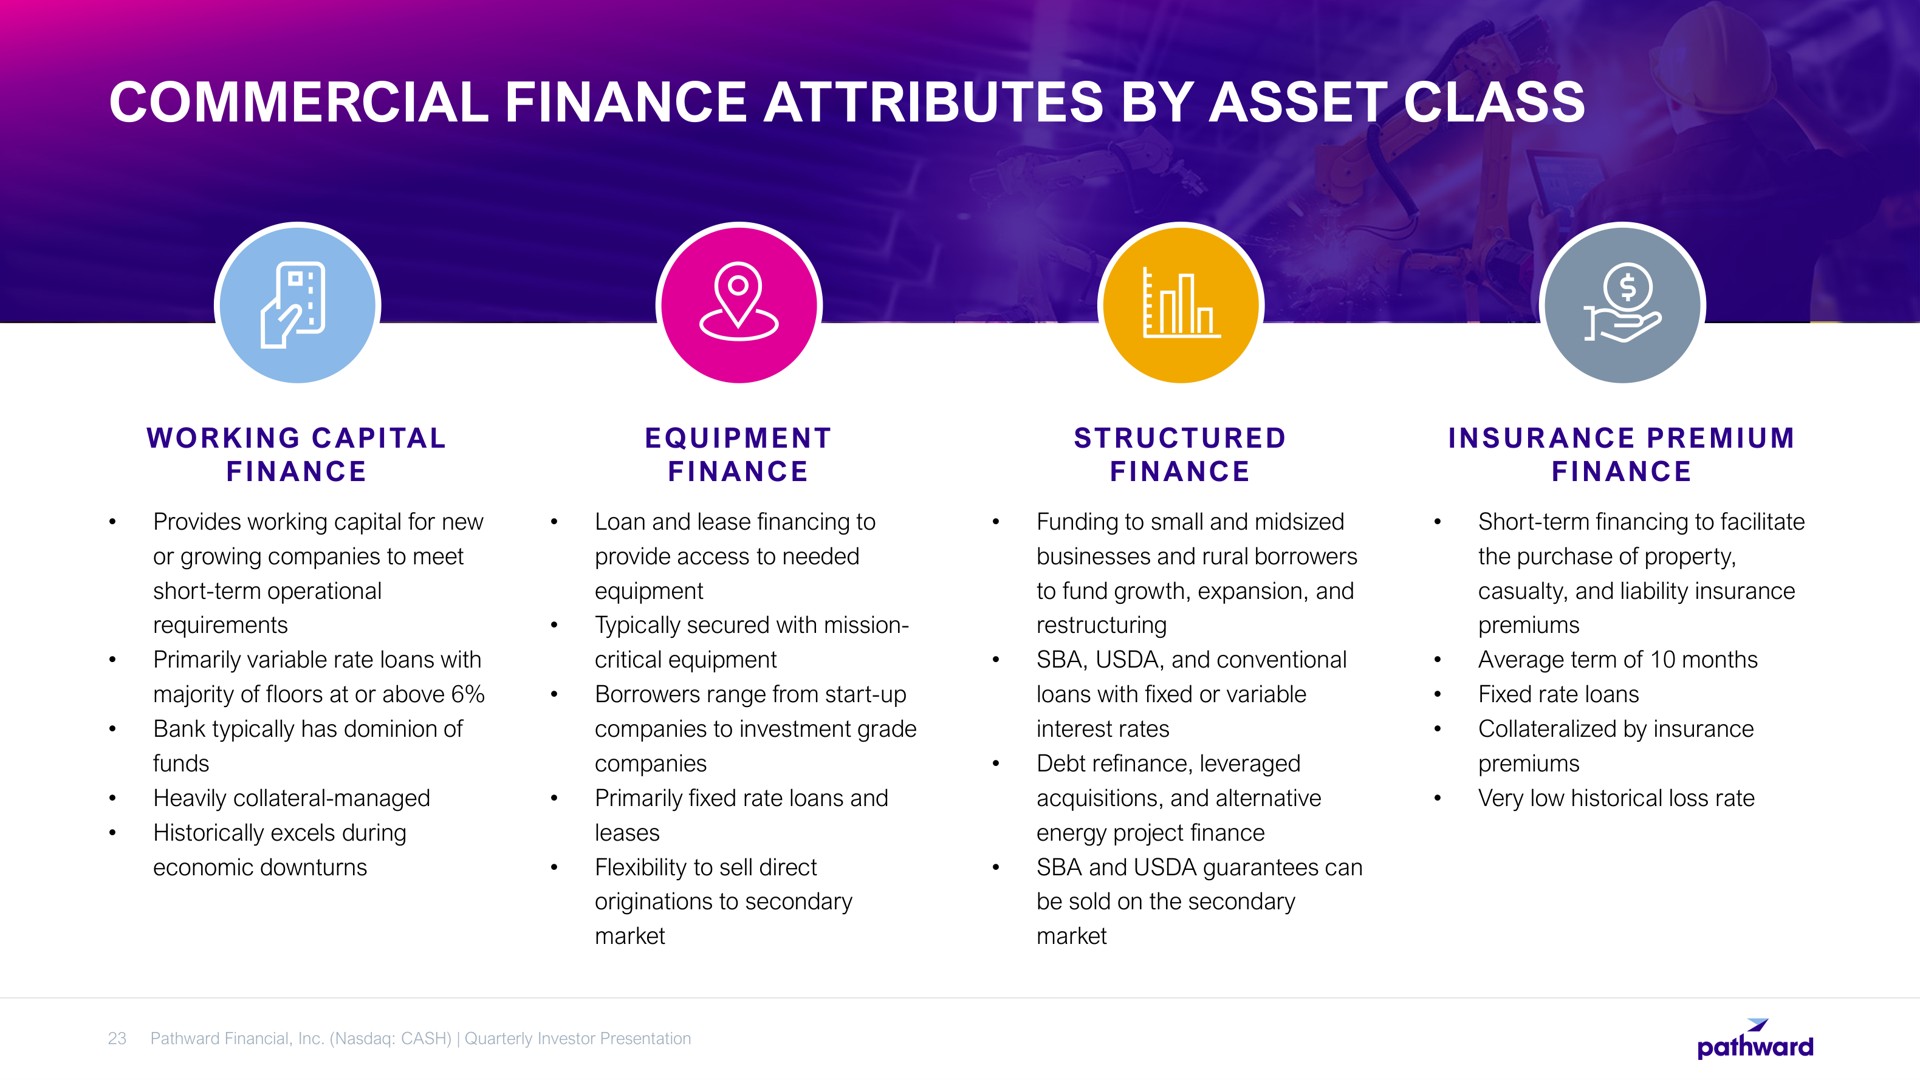 commercial finance attributes by asset class | Pathward Financial